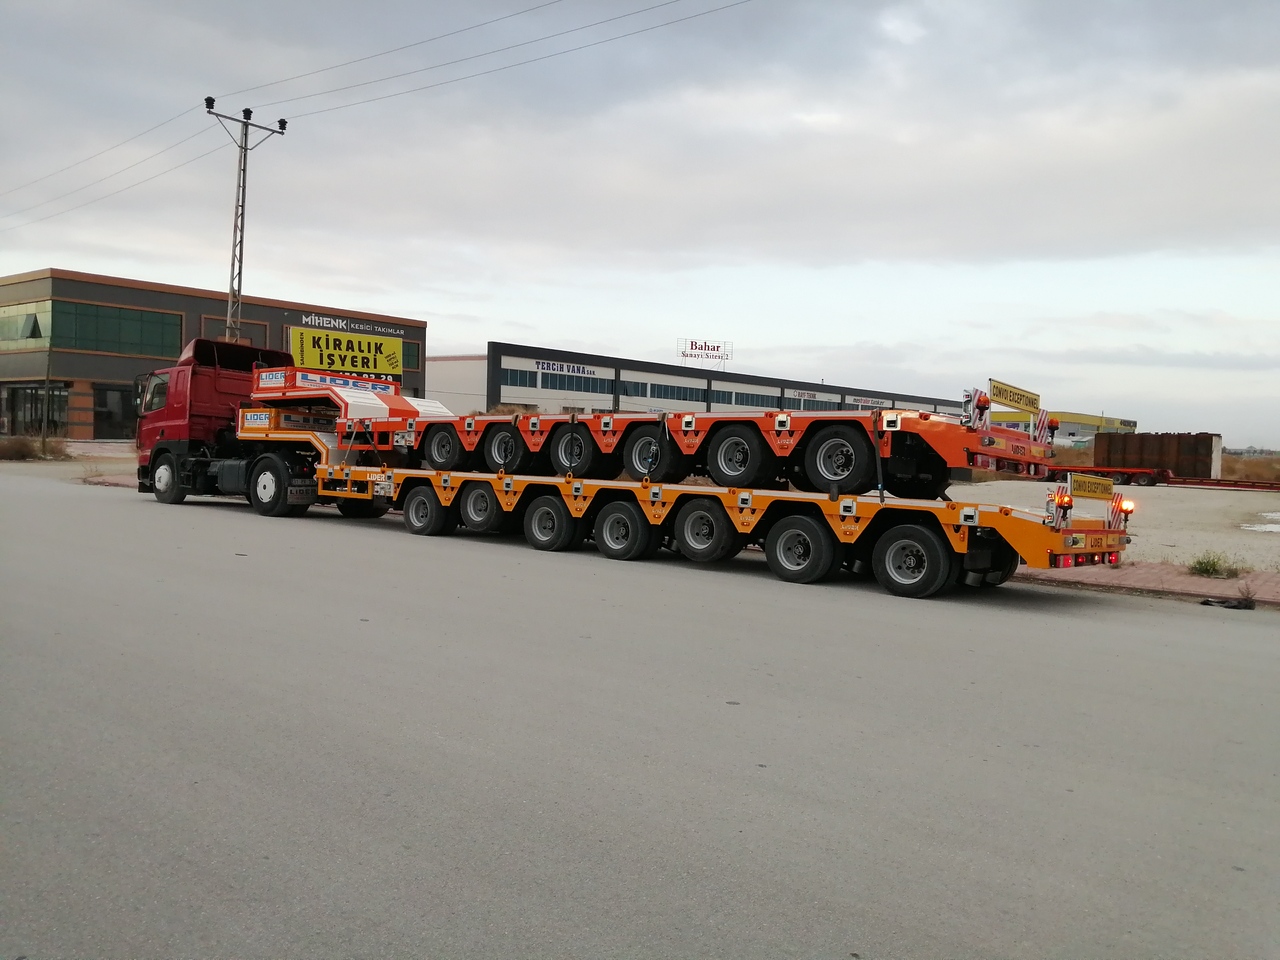 Leasing LIDER 2024 YEAR NEW MODELS containeer flatbes semi TRAILER FOR SALE LIDER 2024 YEAR NEW MODELS containeer flatbes semi TRAILER FOR SALE: afbeelding 1